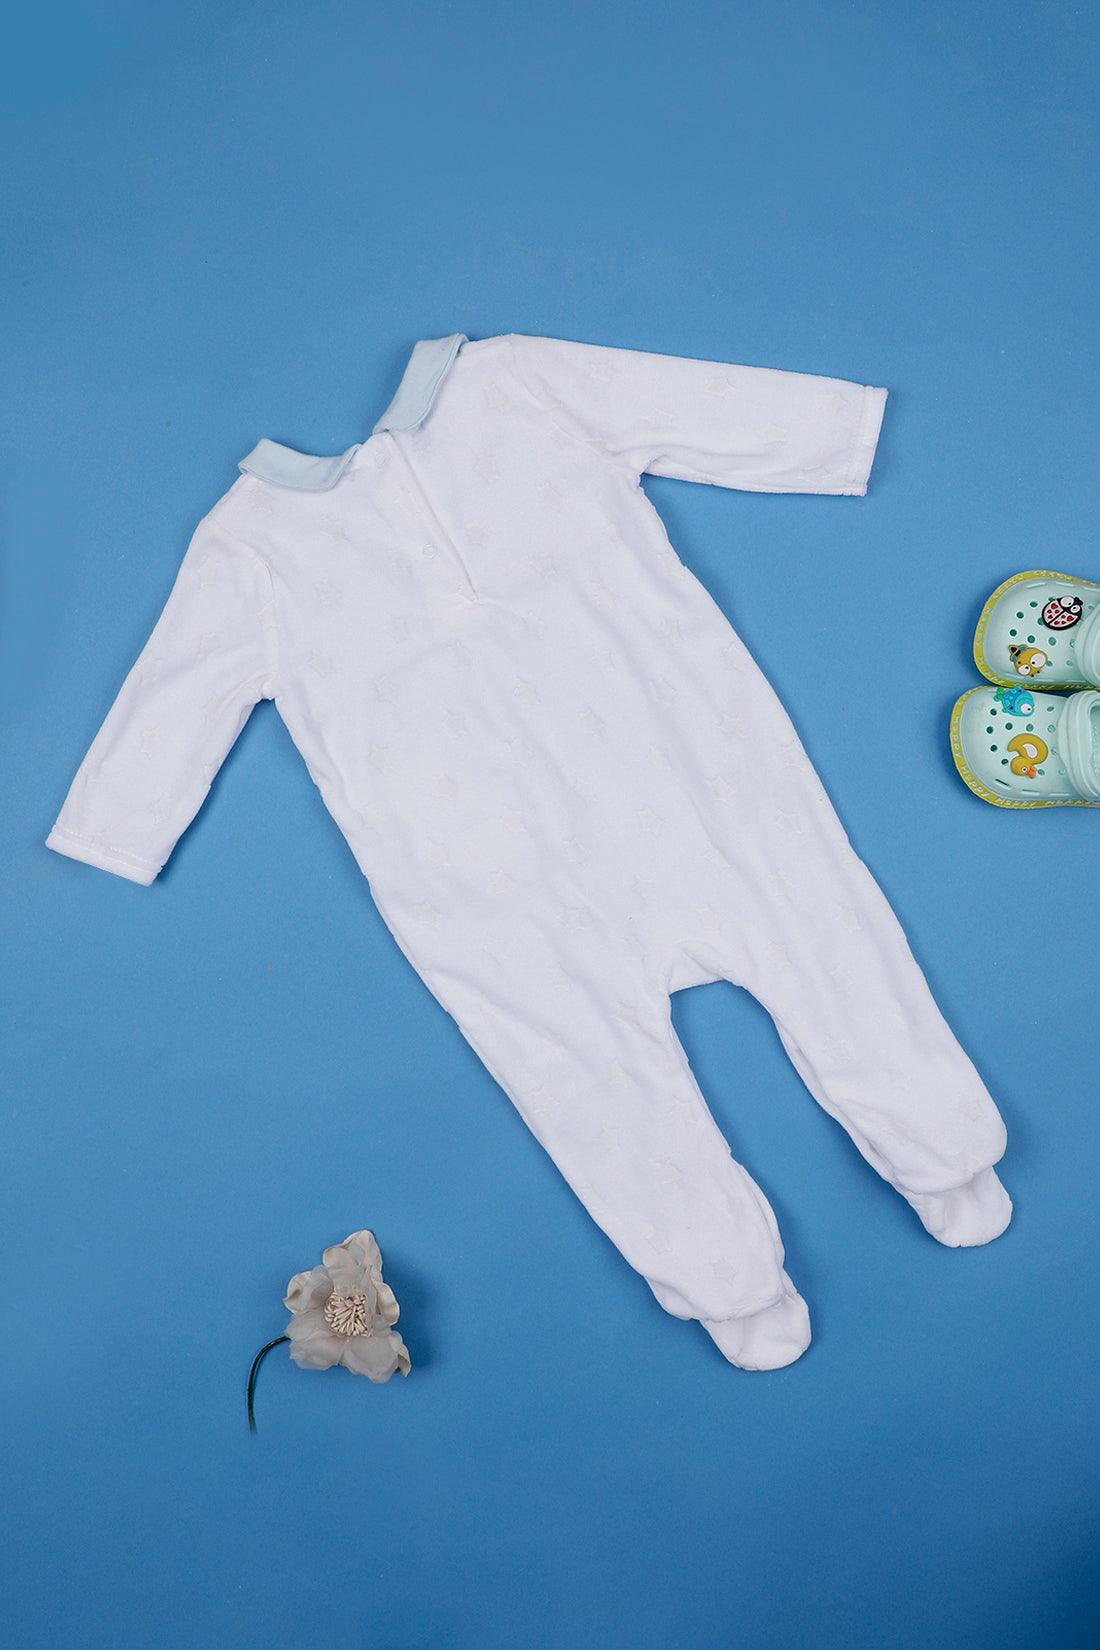 One Friday Infants Girls White Peter Pan Cotton Sleepsuit